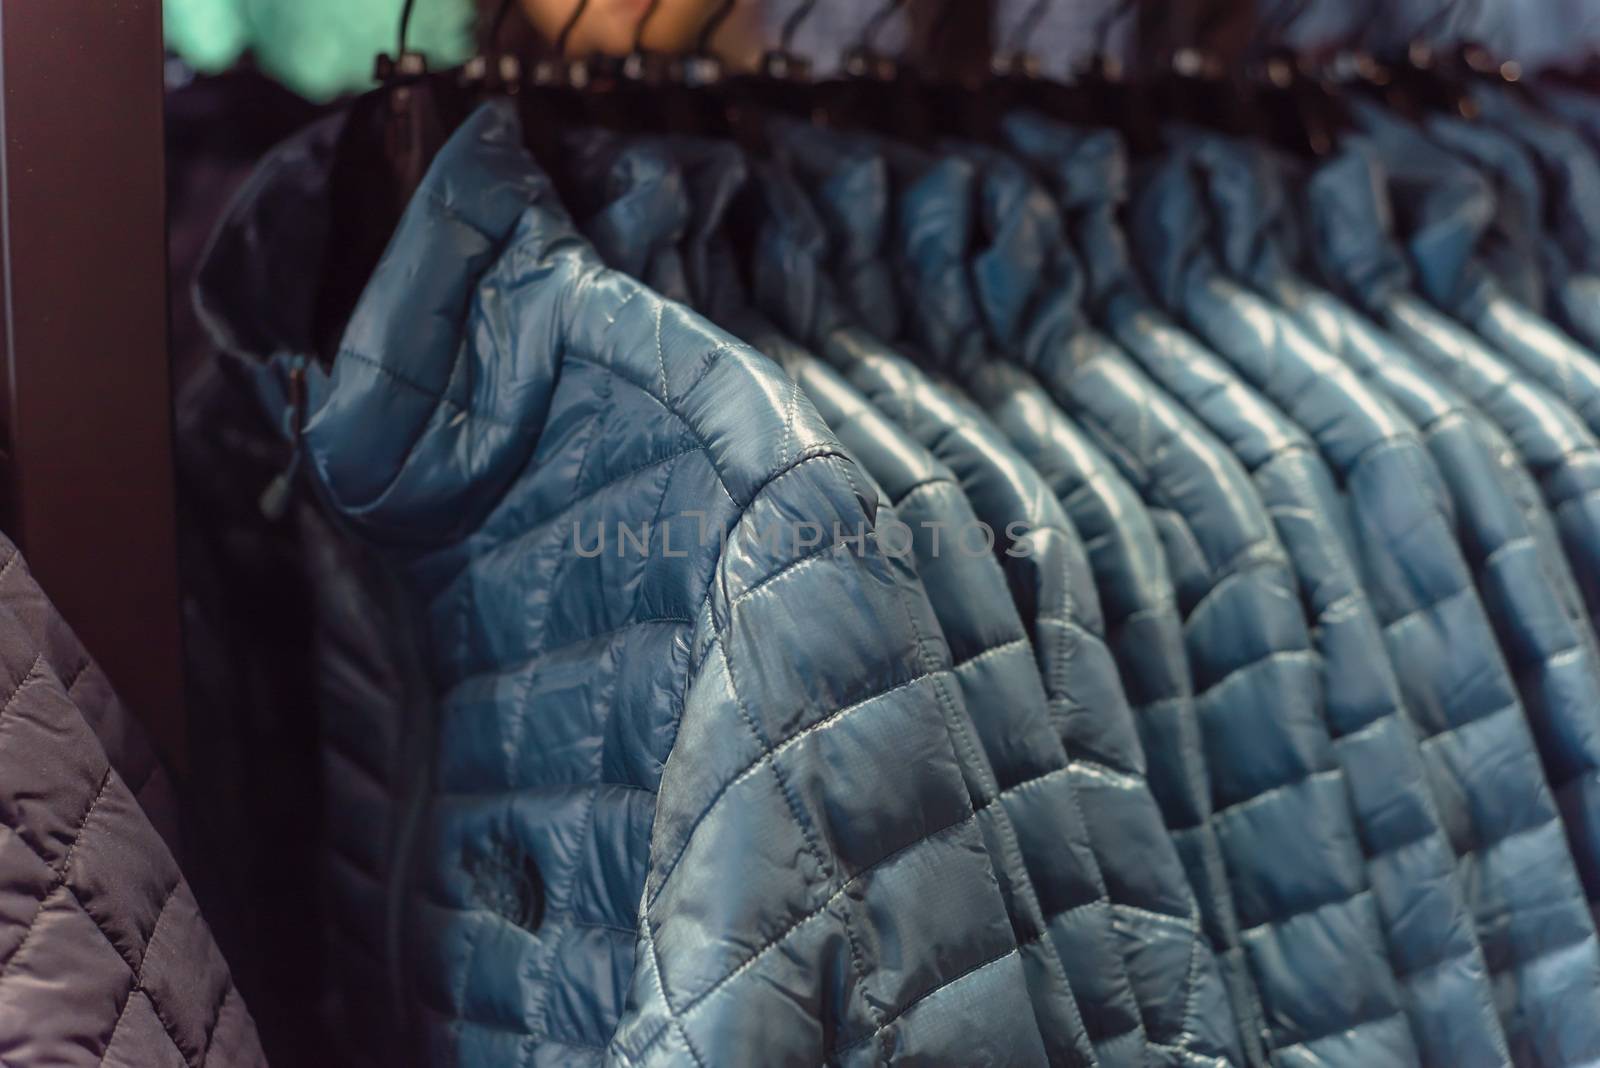 Close-up winter down on clothes rack at American outdoor clothing shop. Insulated fashionable jacket with zip pocket.